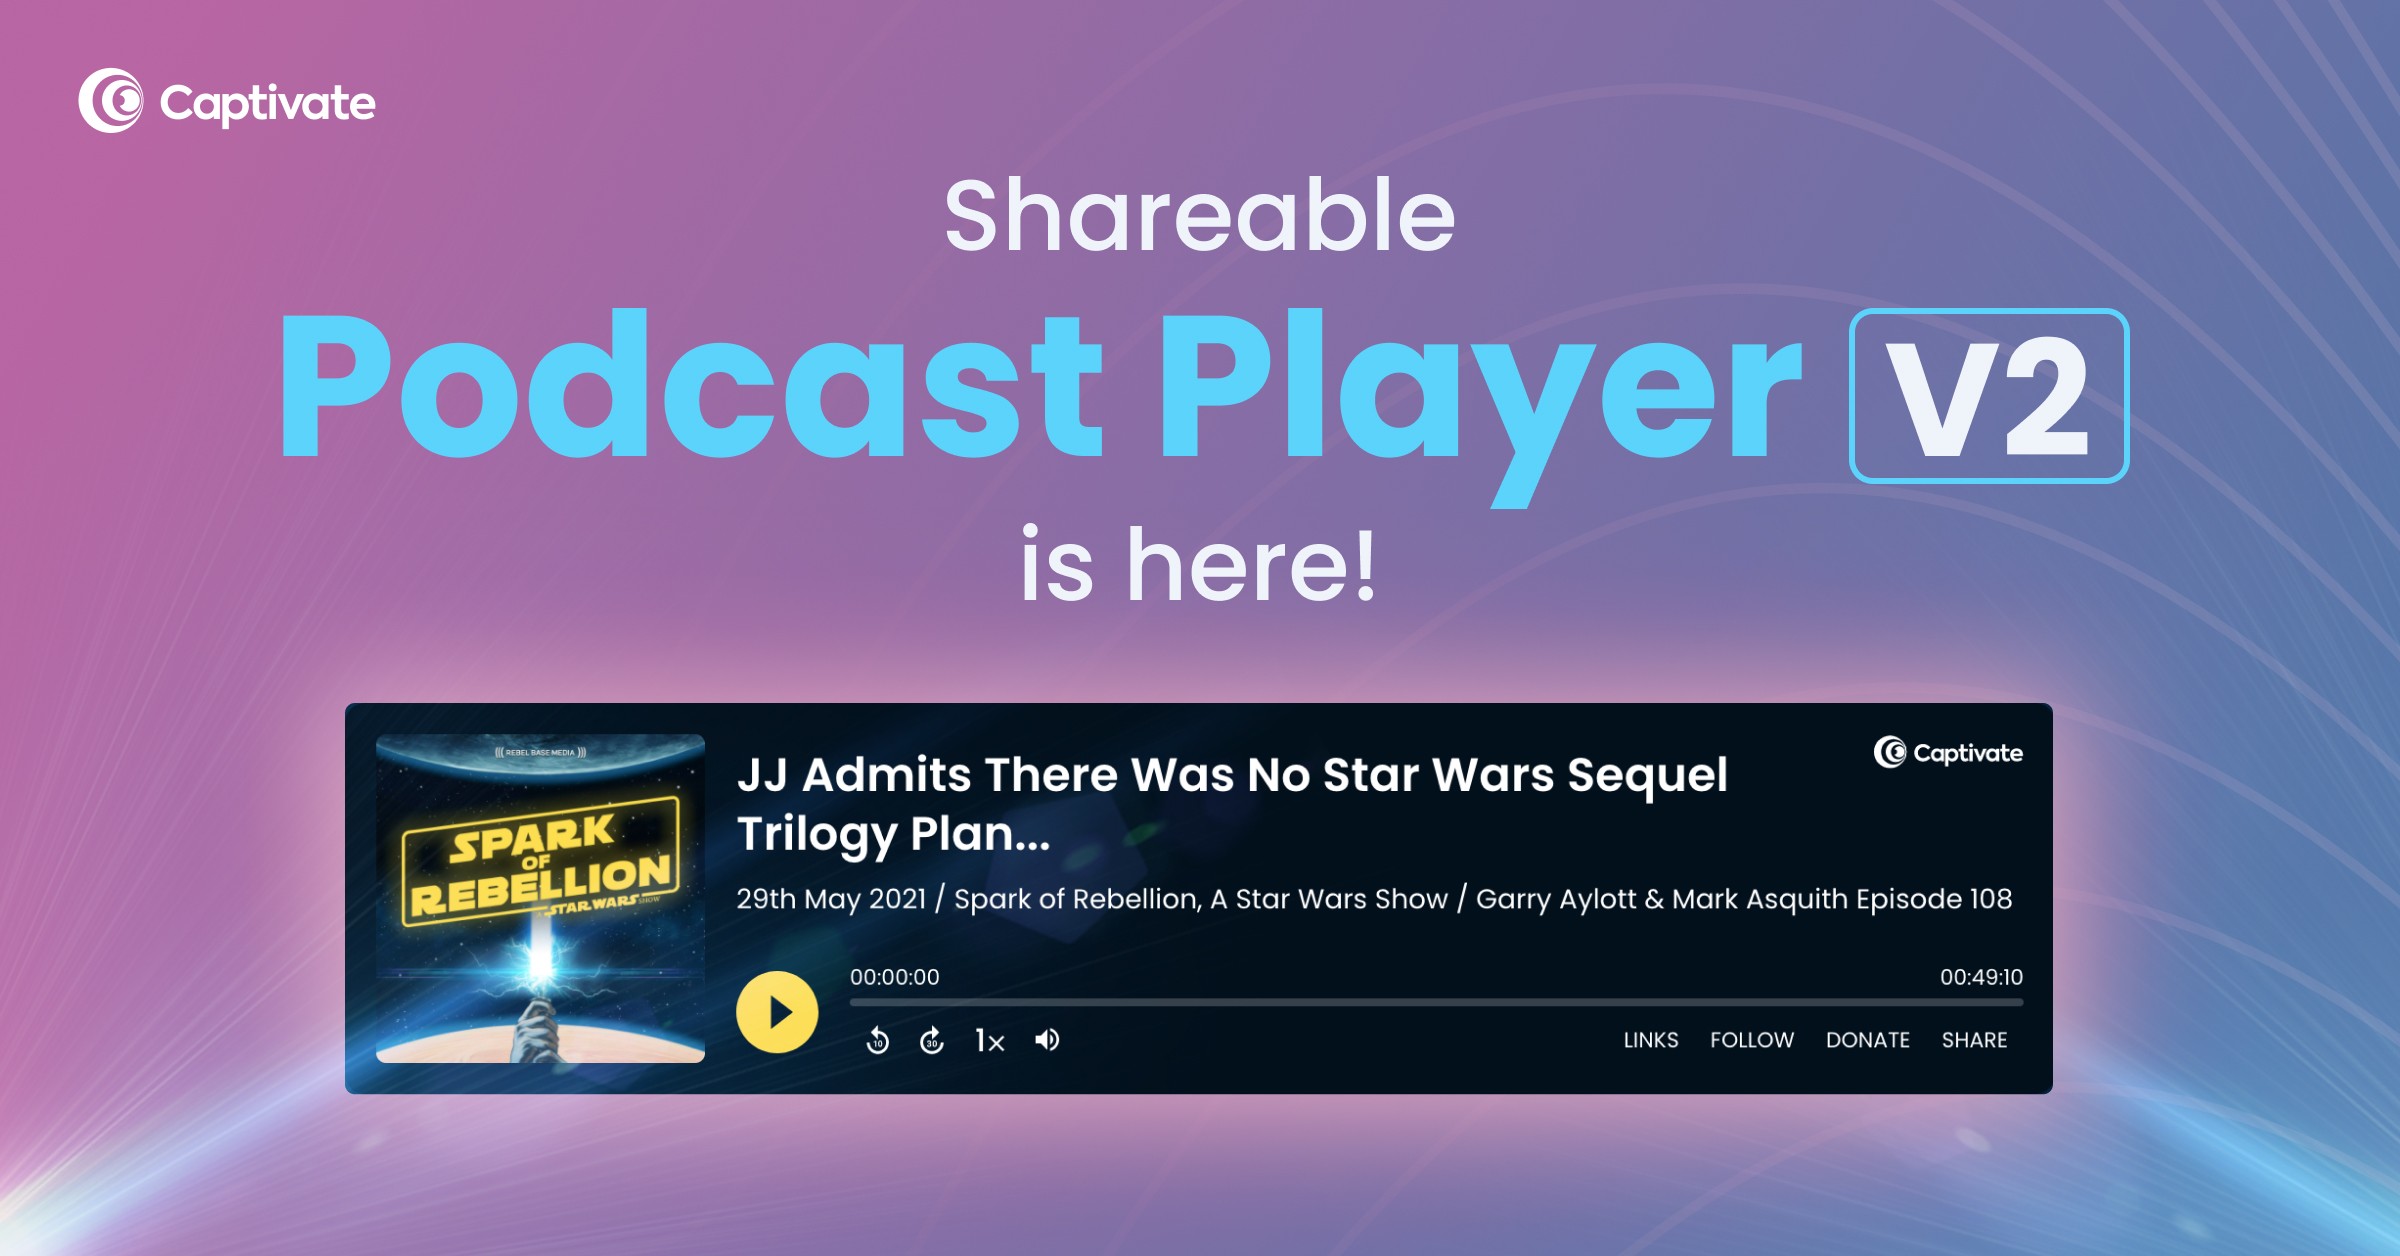 The Captivate Shareable Podcast Player v2 is Here